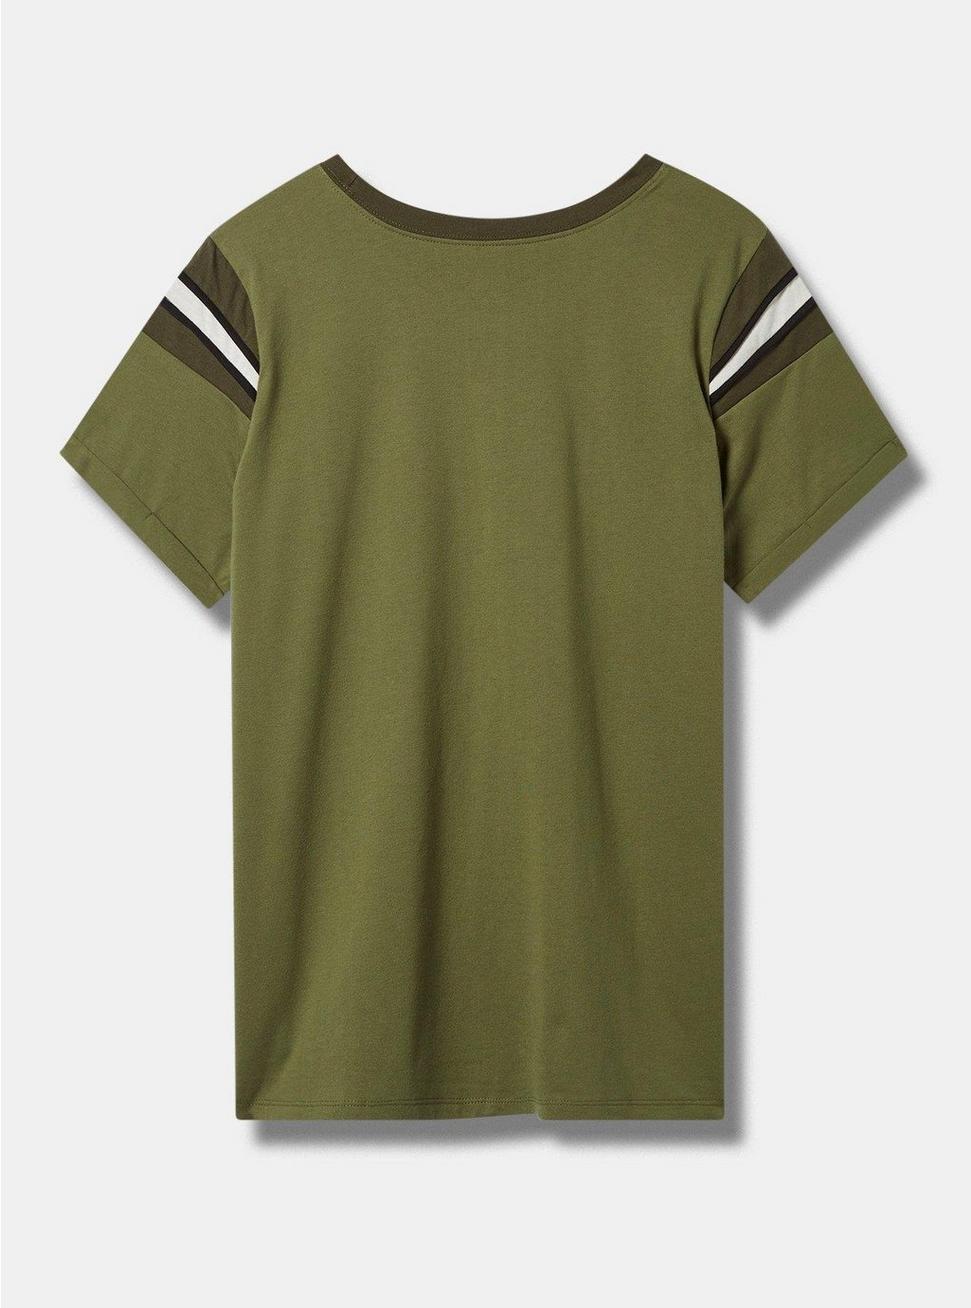 Plus Size Daria Classic Fit Cotton Contrast Sleeve Tee, OLIVE, alternate